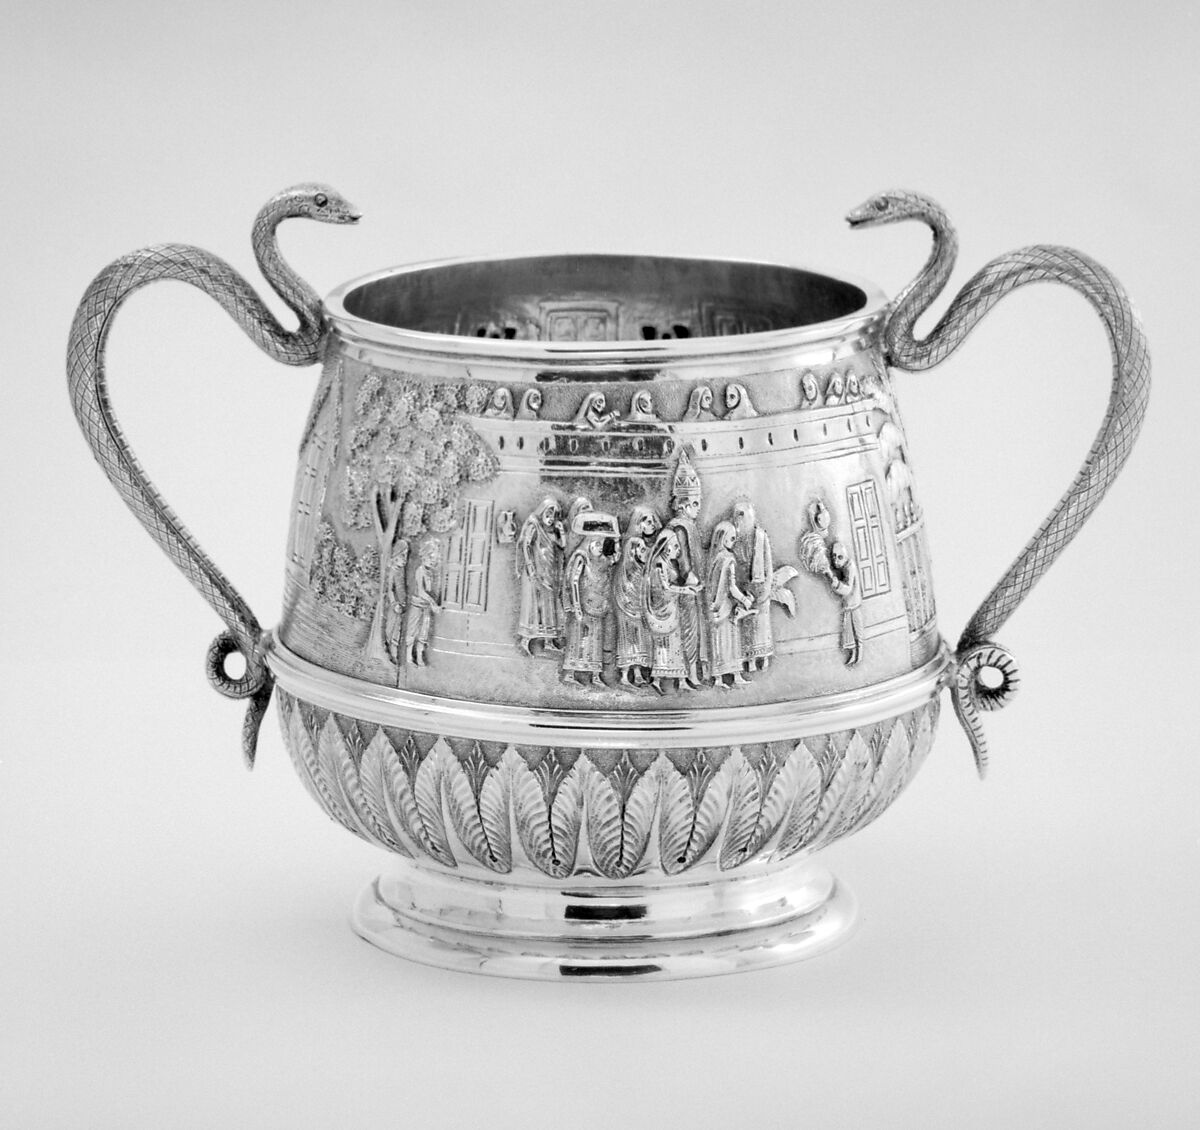 Sugar bowl (part of a set), Silver, Anglo-Indian 